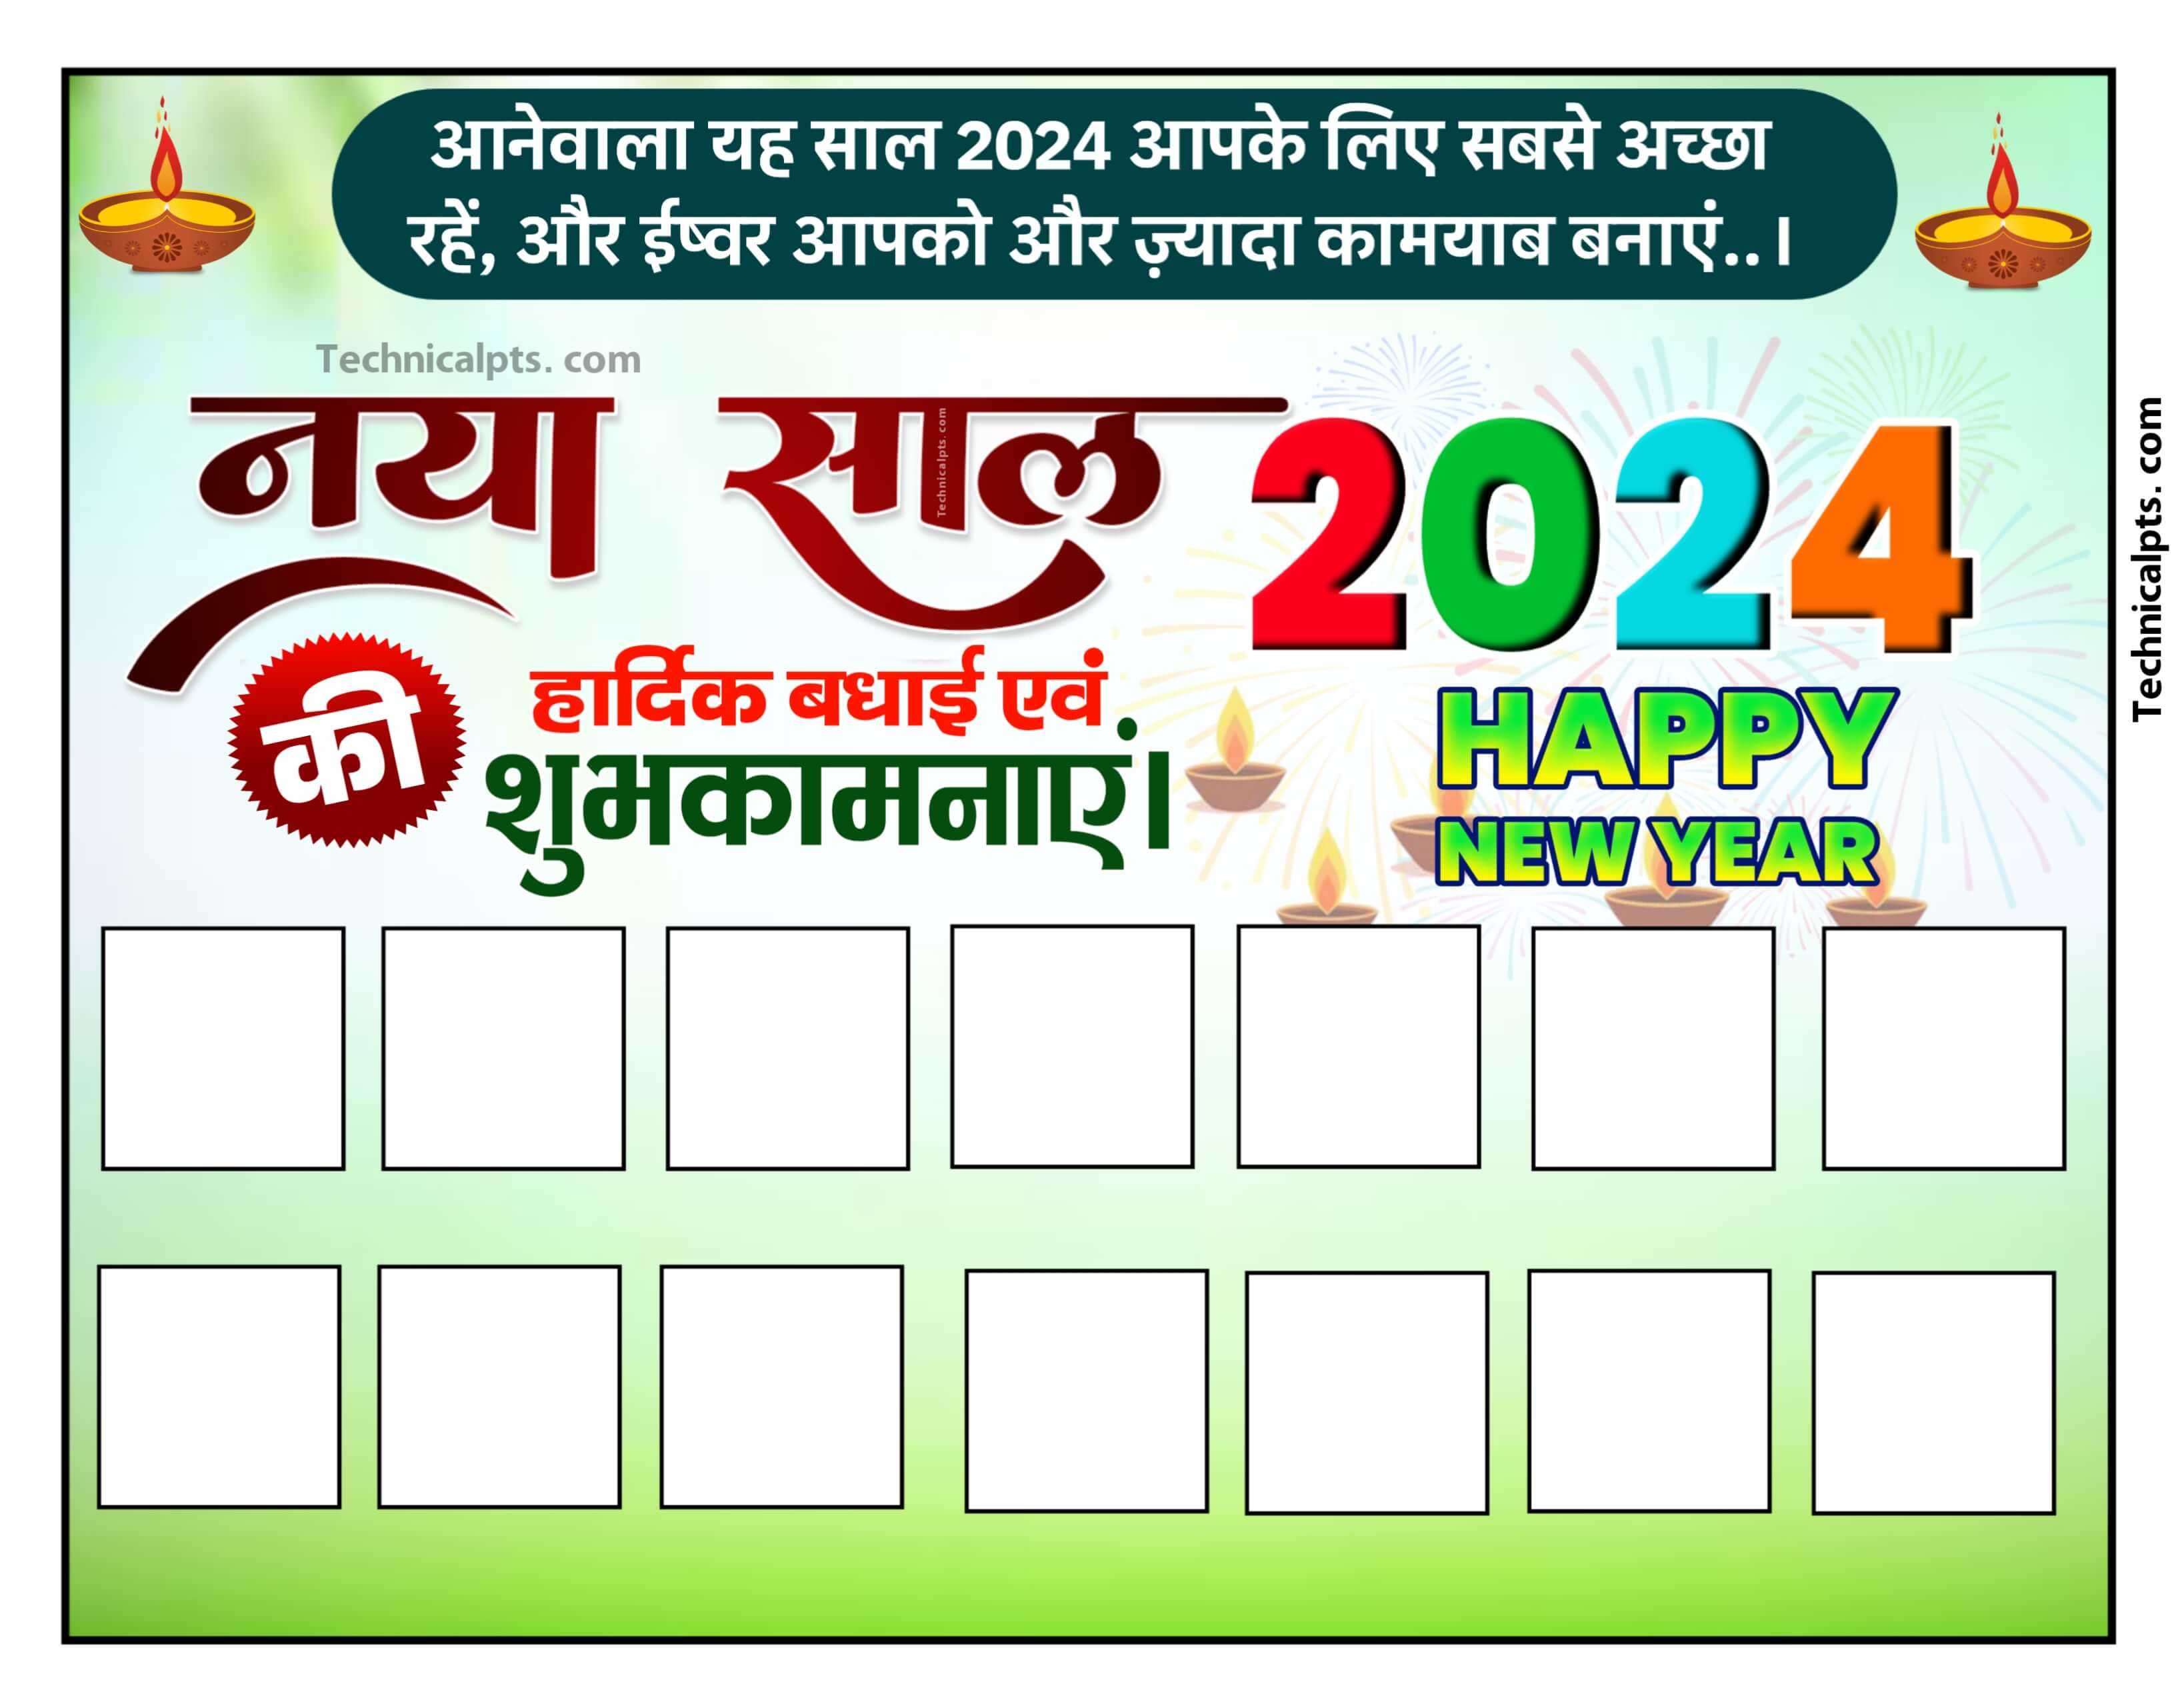 New year banner editing 2024| happy new year 2024 group banner editing| naya sal ka banner kaise banaen mobile se